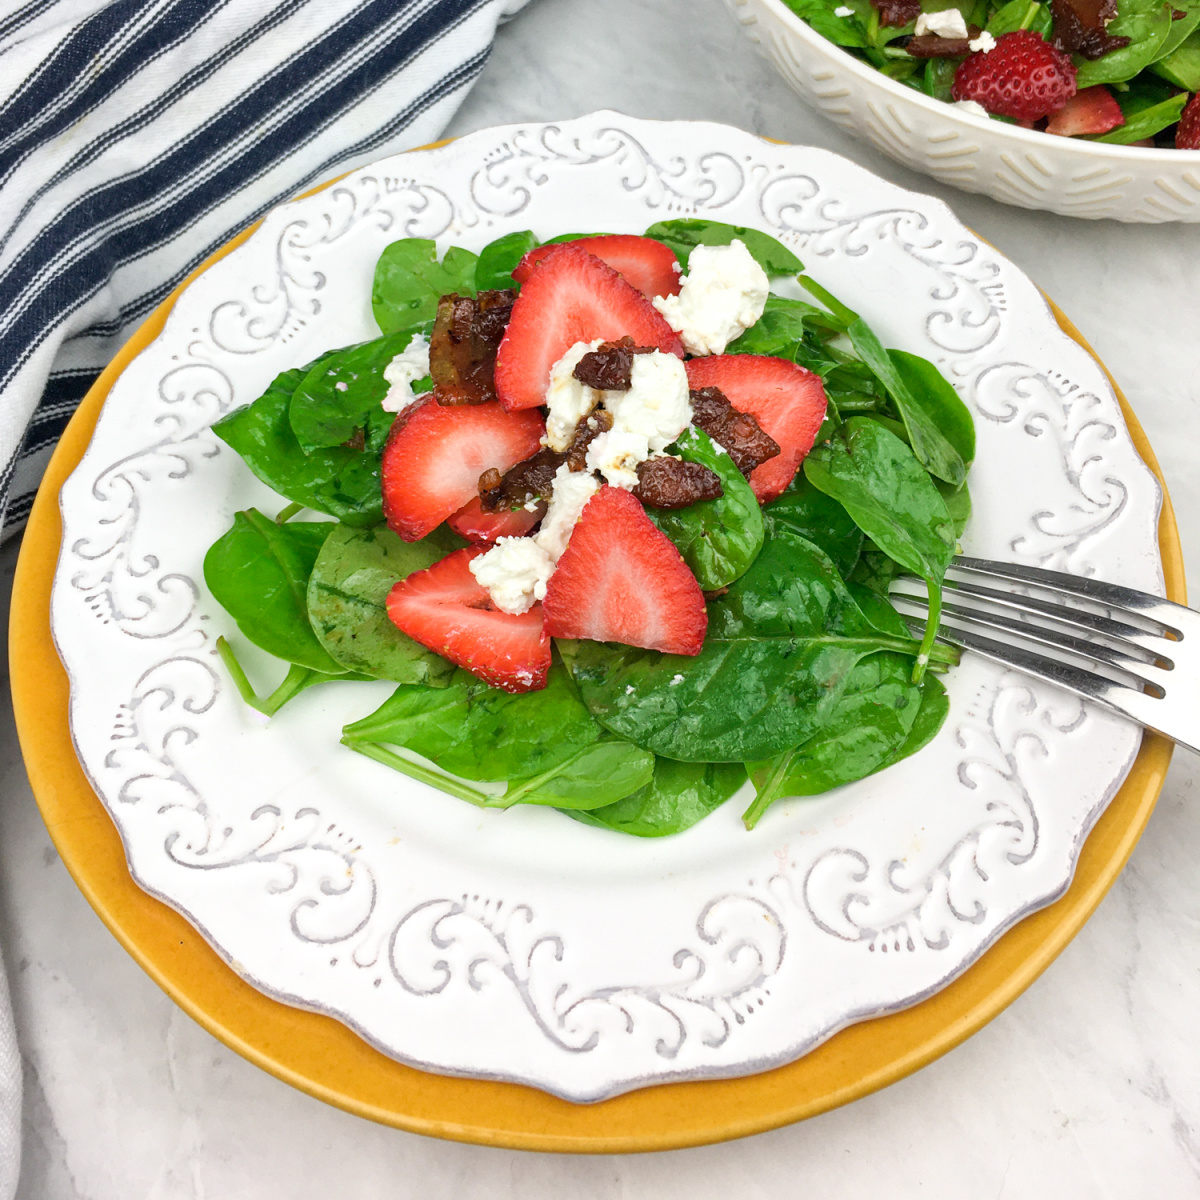 Spinach salad with hot bacon dressing